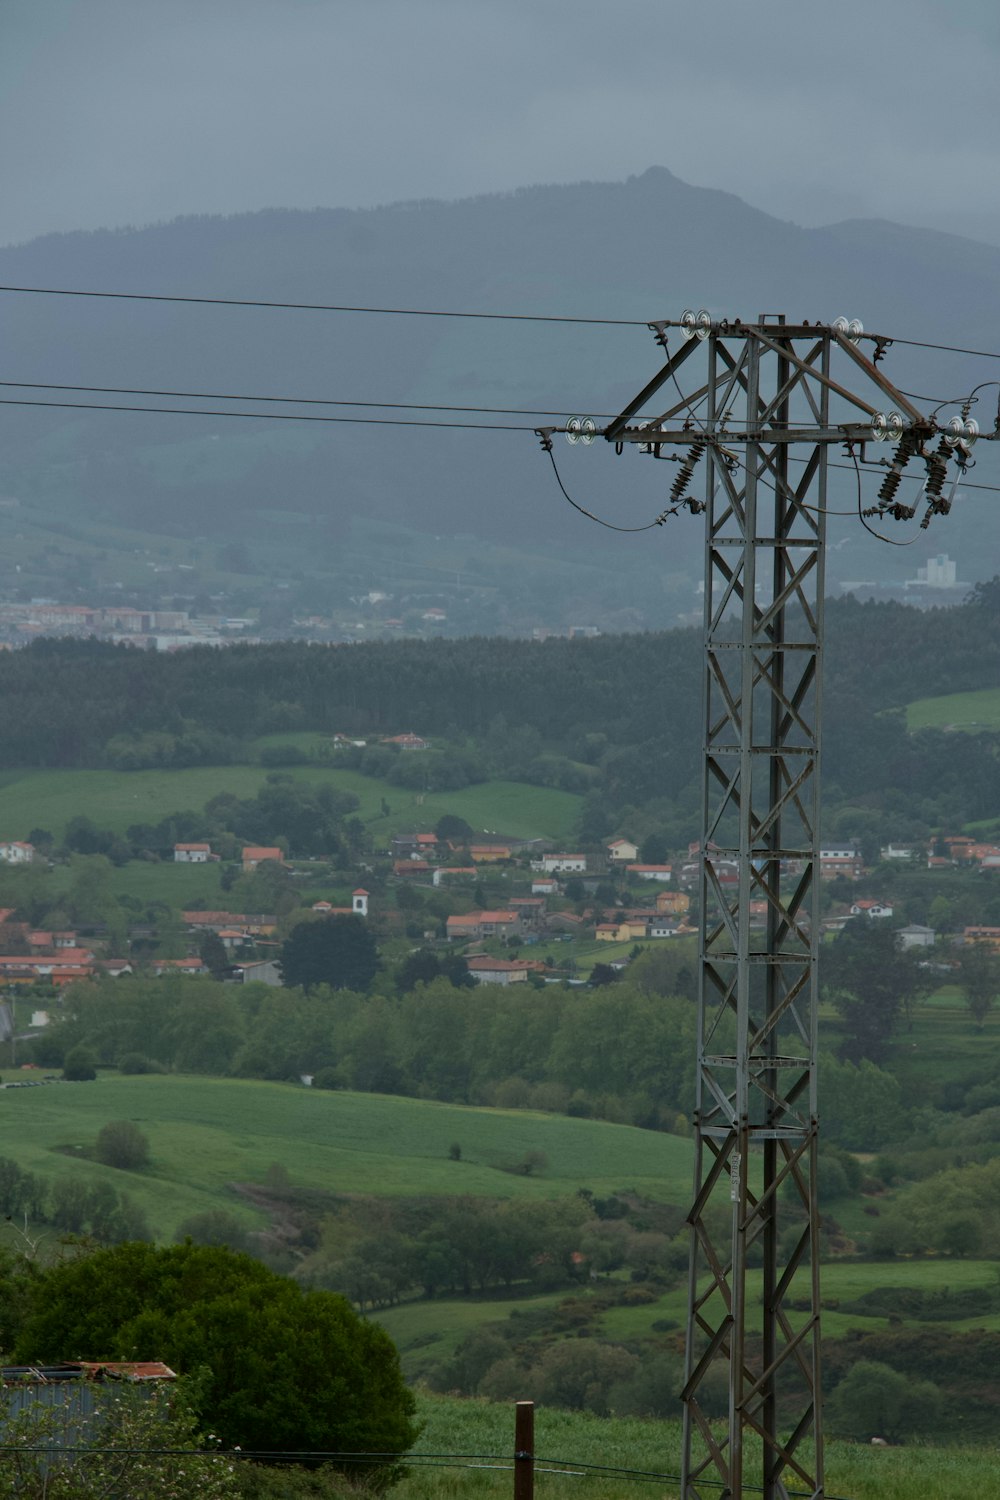 a view of a city from a high voltage power line